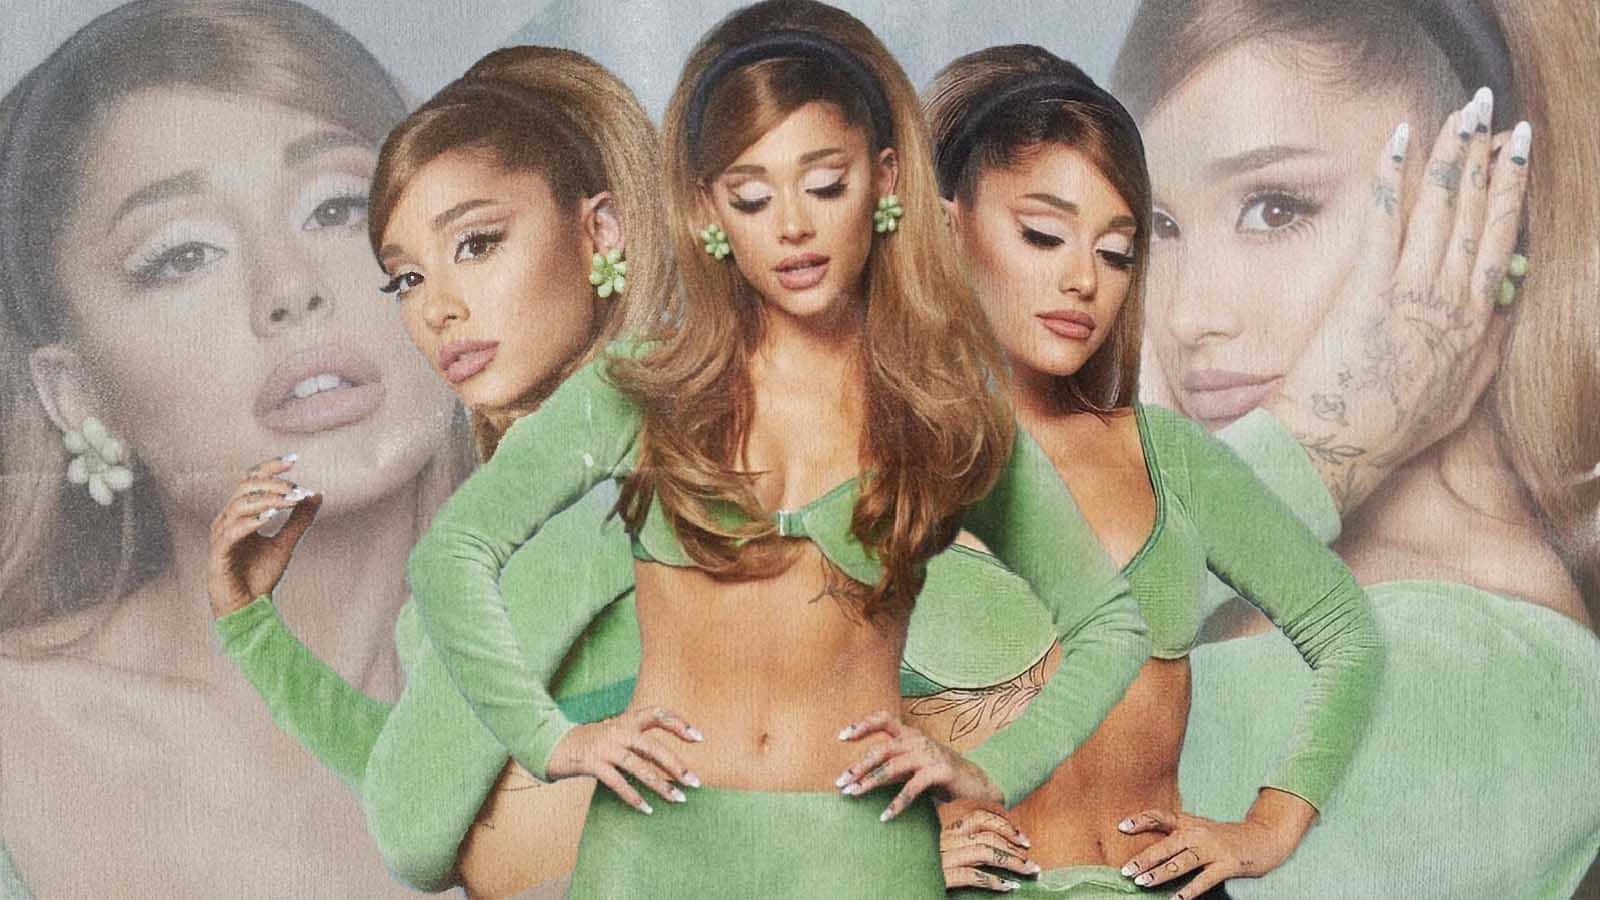 Ariana Grande Positions Multiple Poses Wallpaper